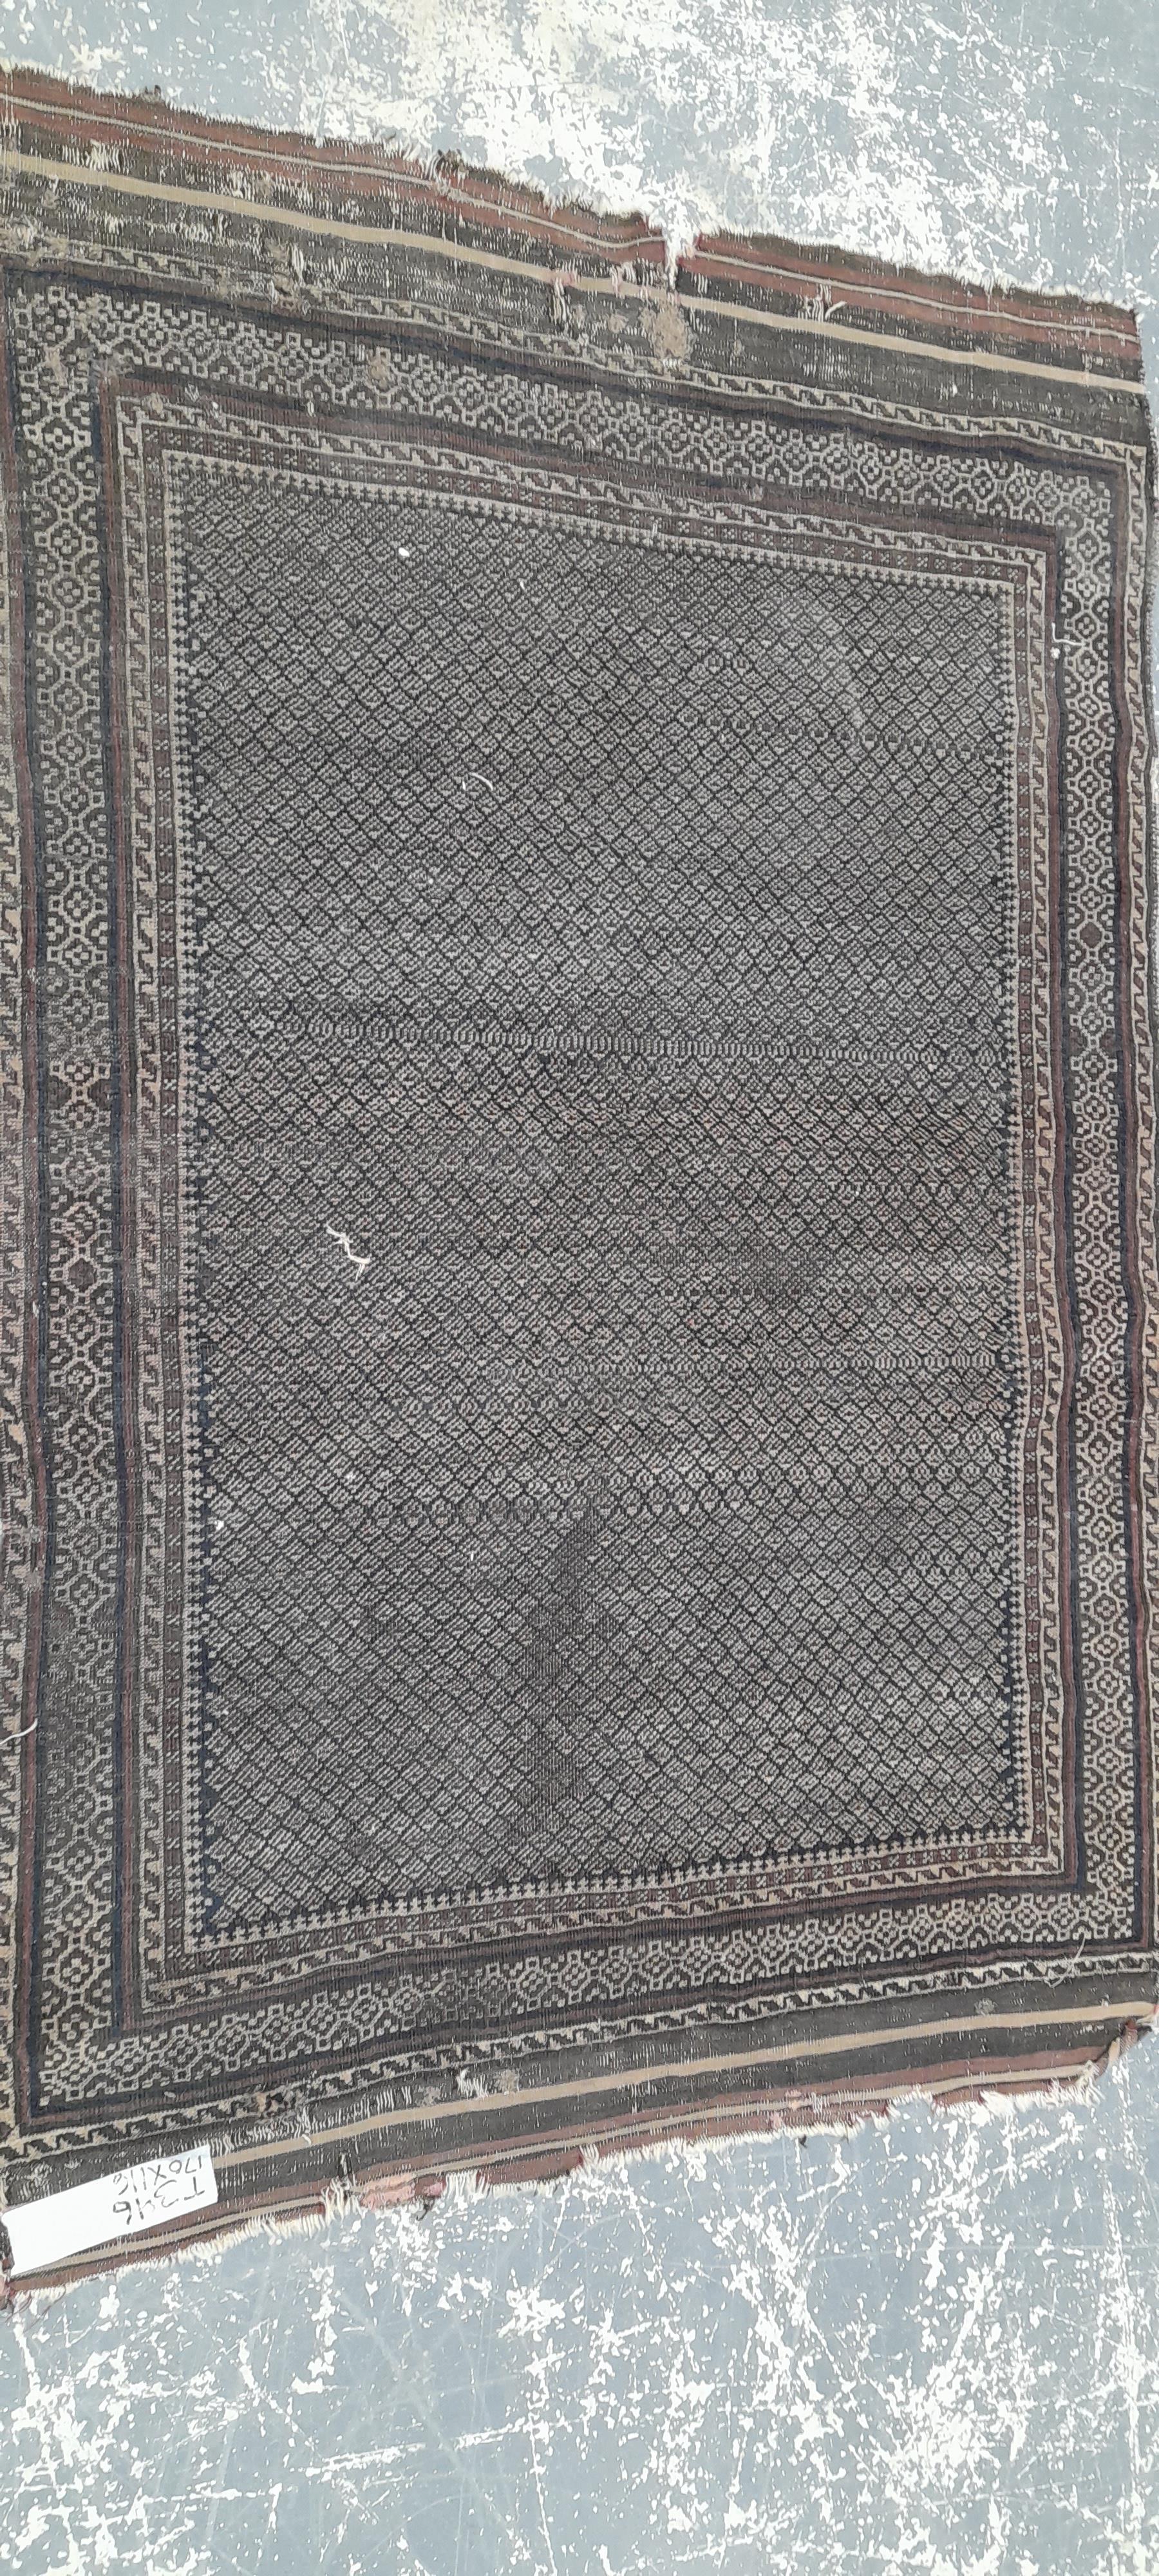 AN ANTIQUE BELOUCH RUG 170 x 116 cm. - Image 2 of 6